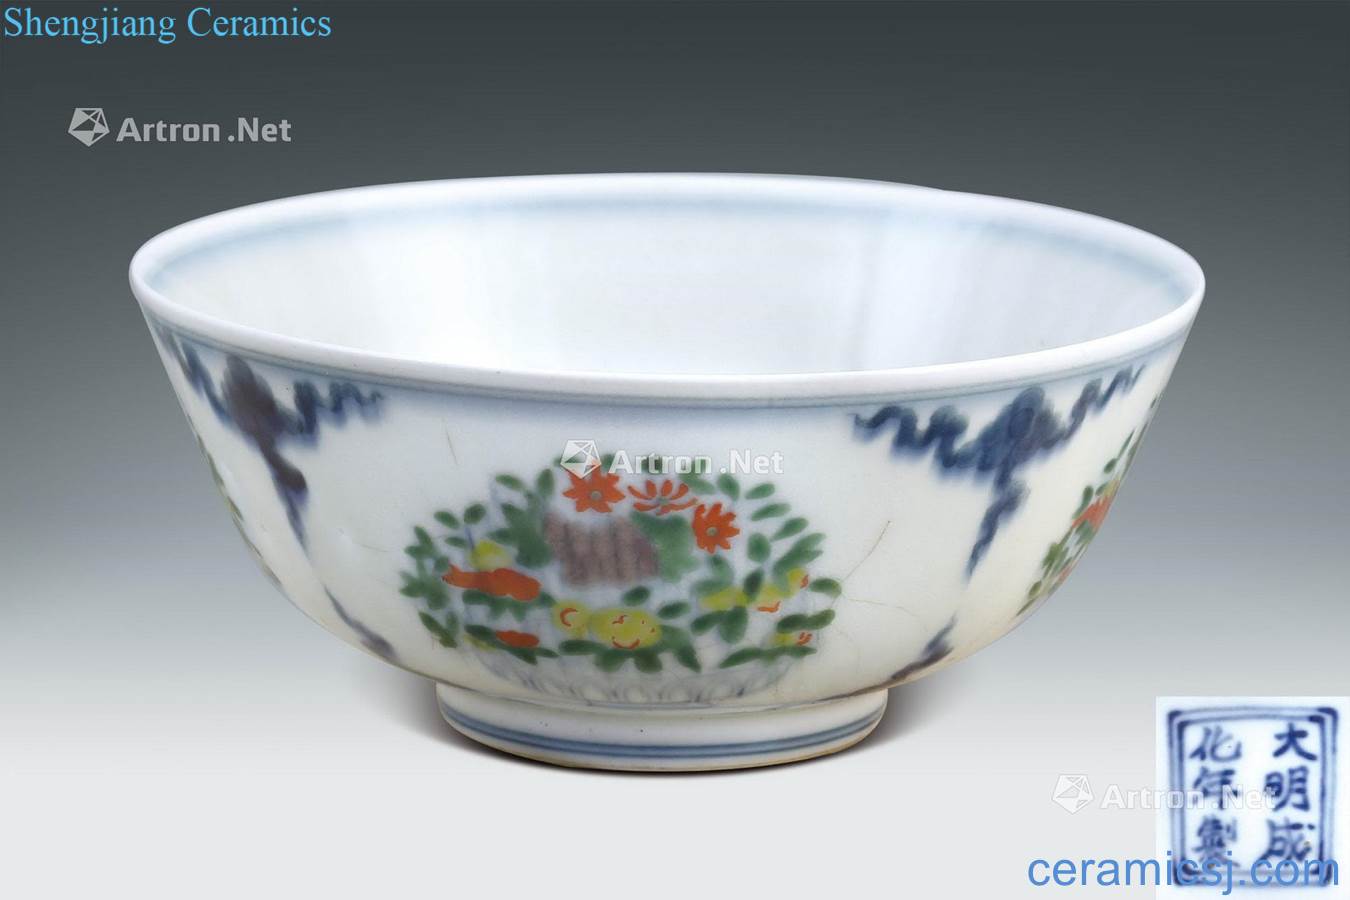 In late qing pastel spends flower bowls